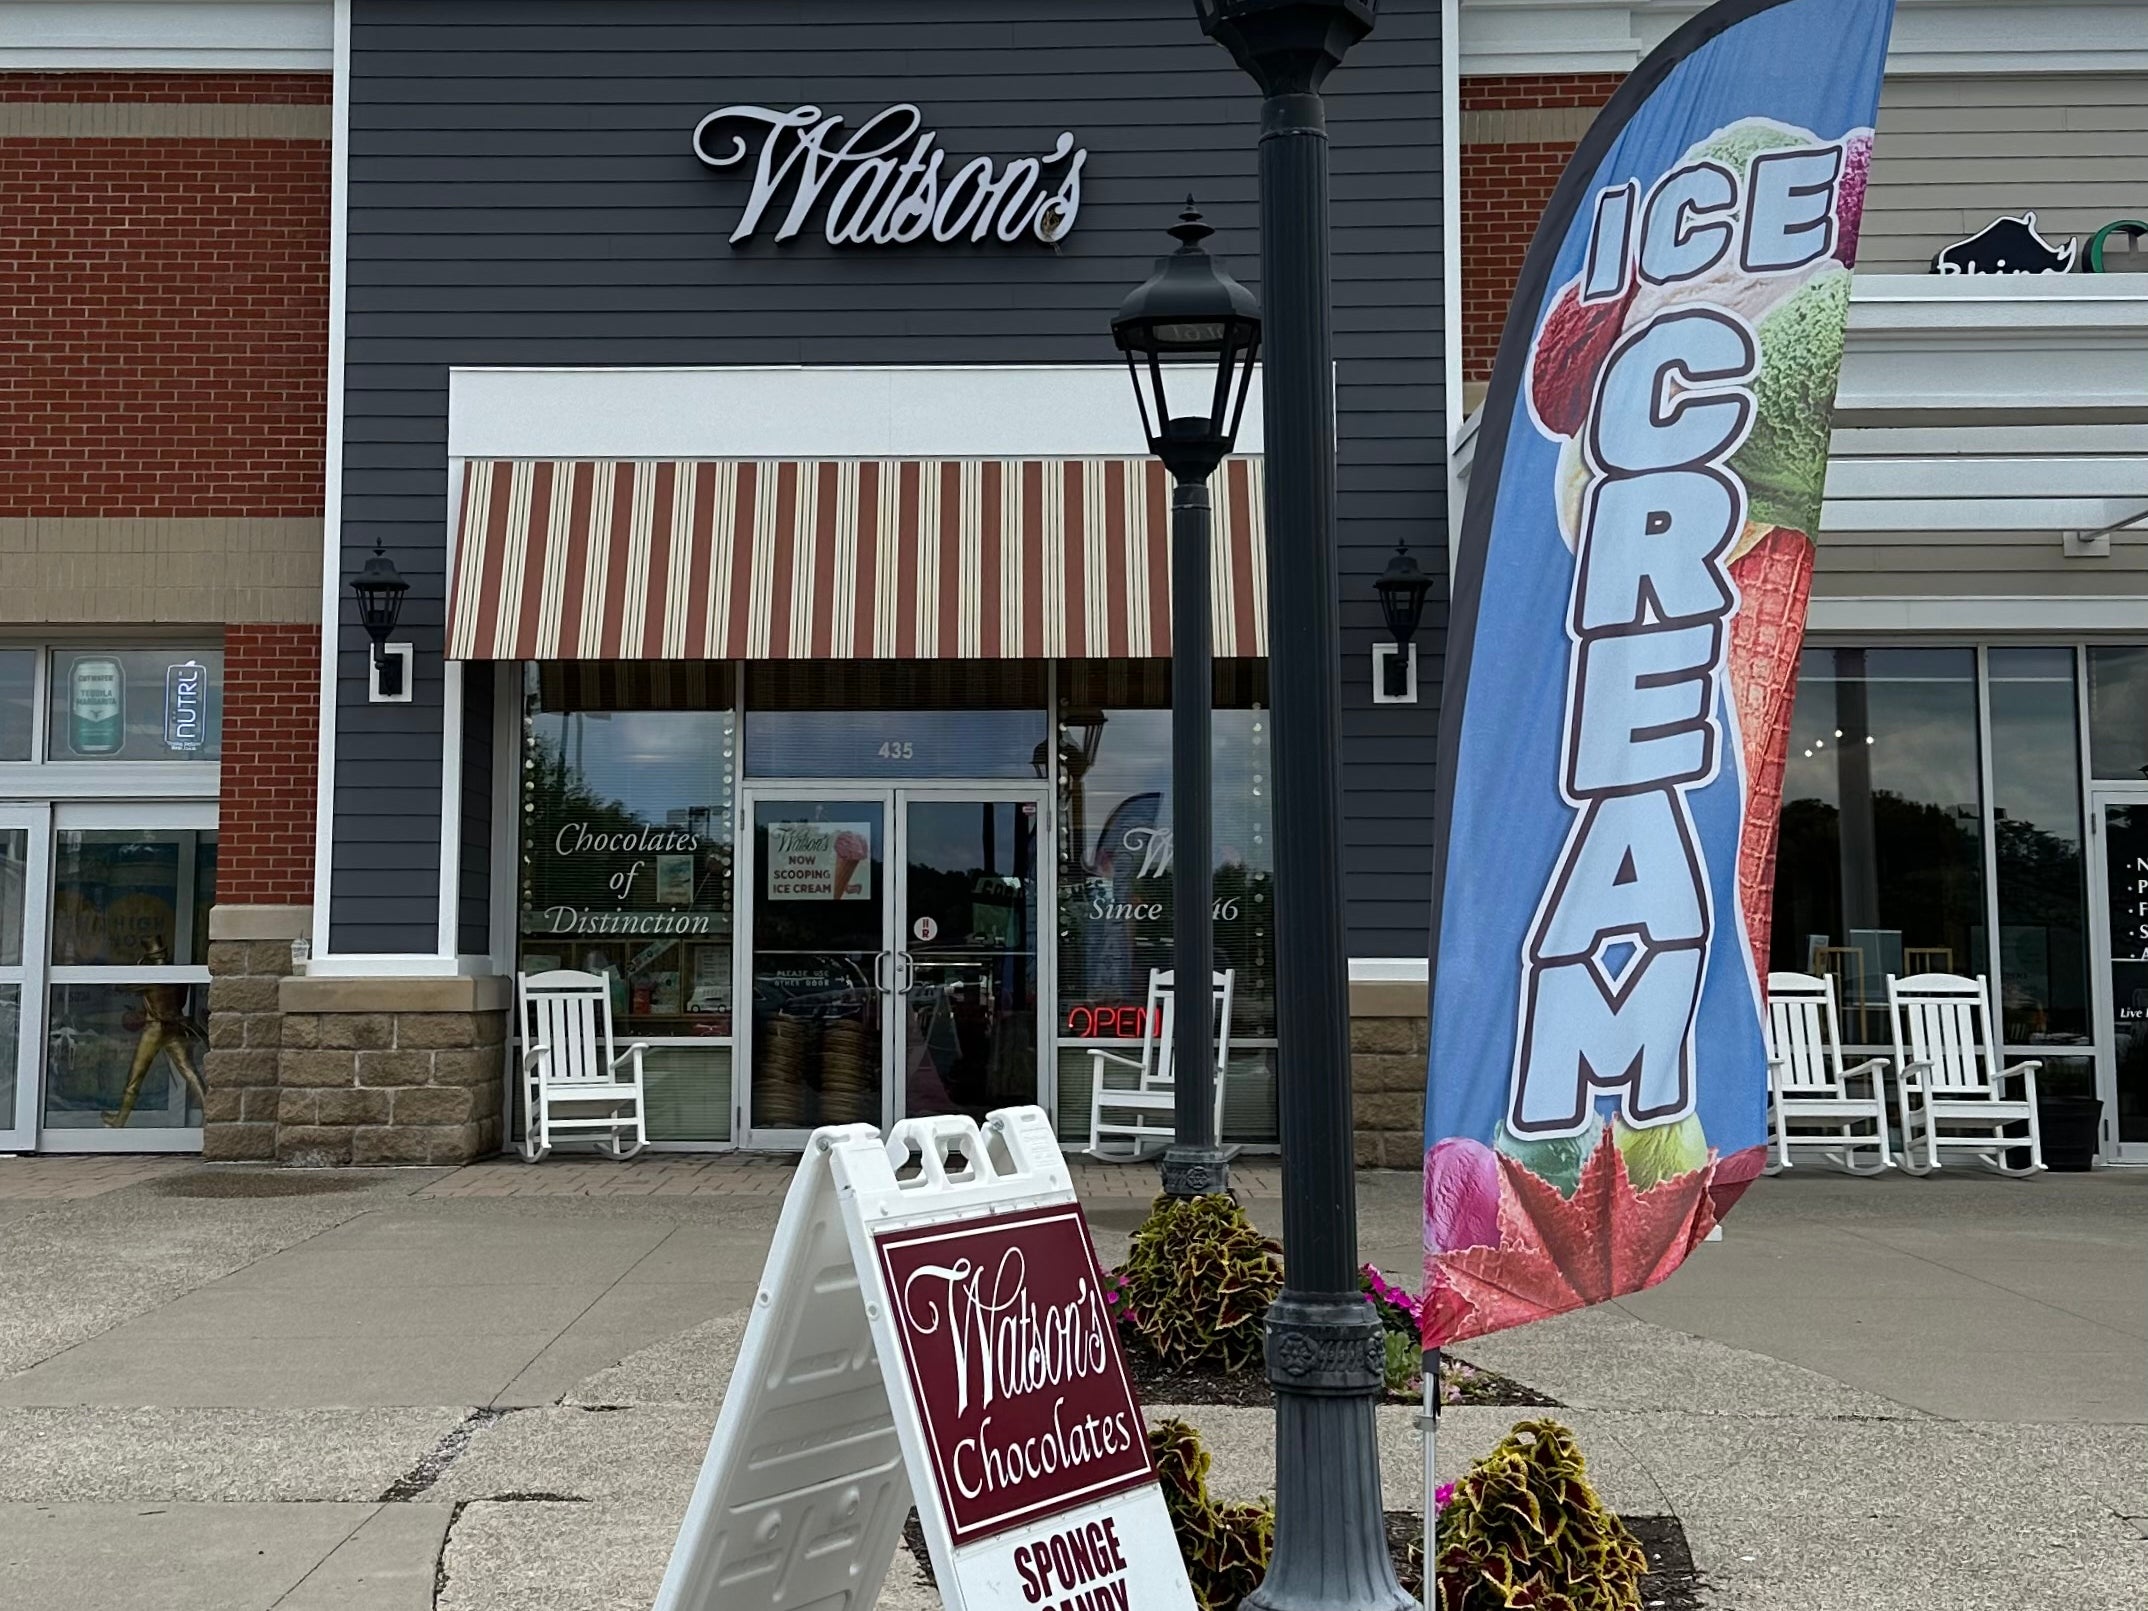 Profile: Watson's in Victor, NY